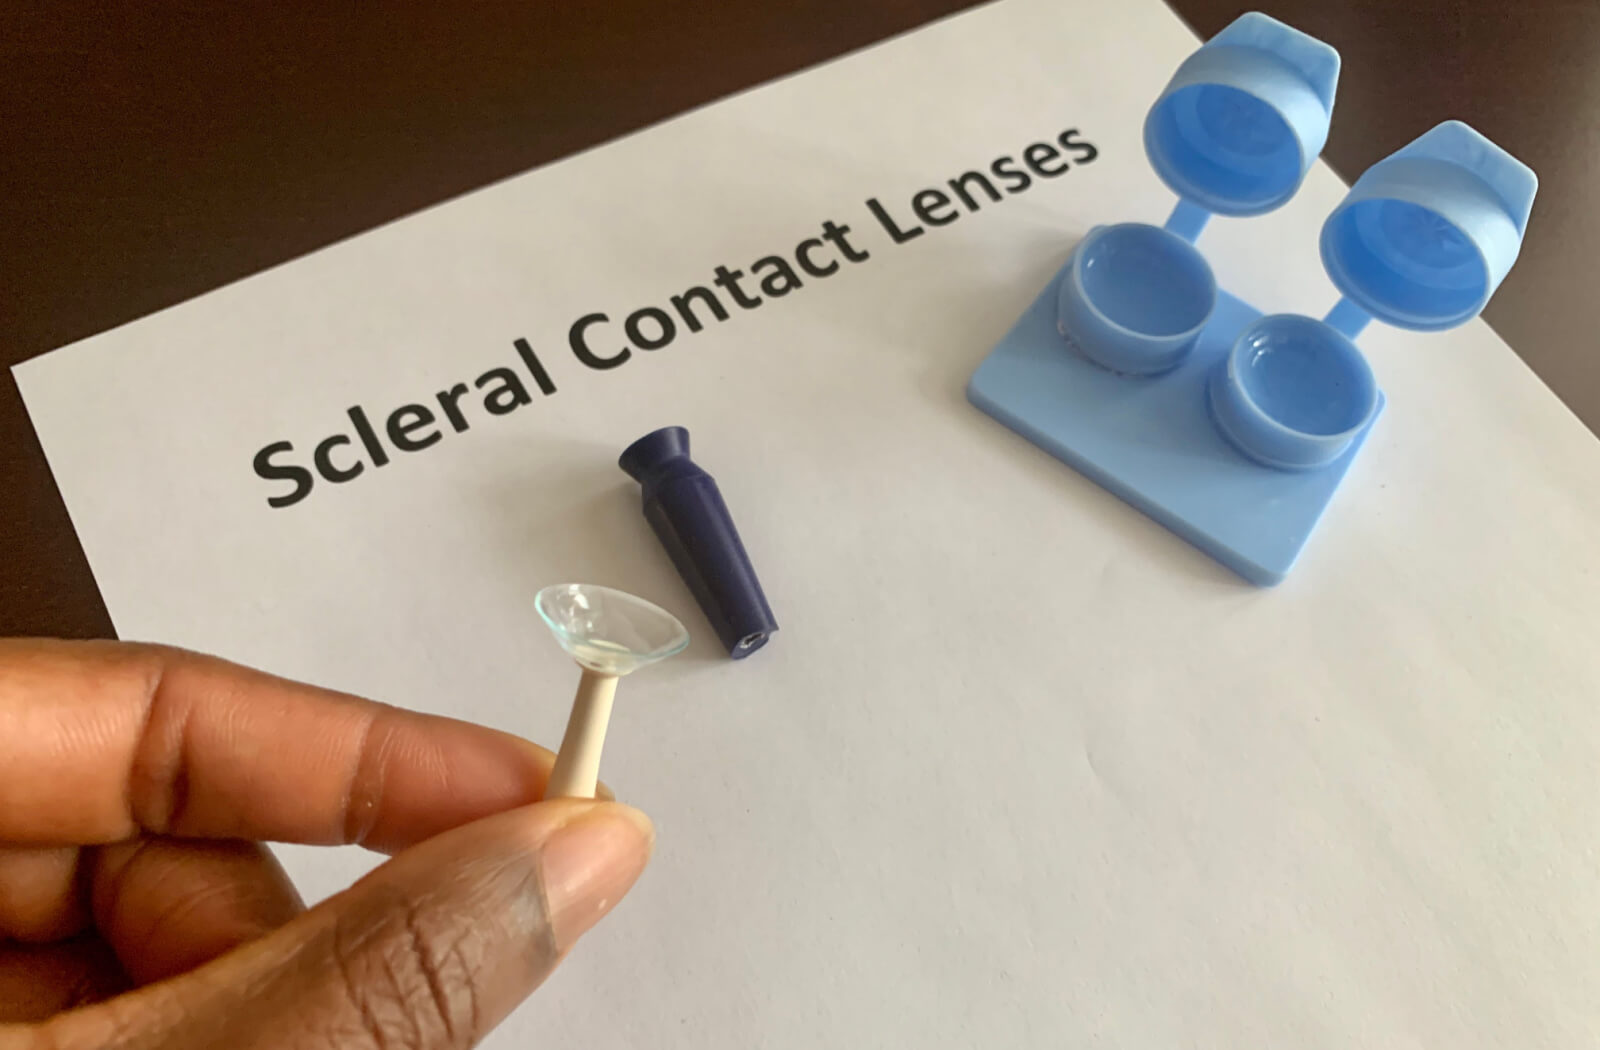 A contact lens case with scleral contacts and a contact lens insertion and removal kit.